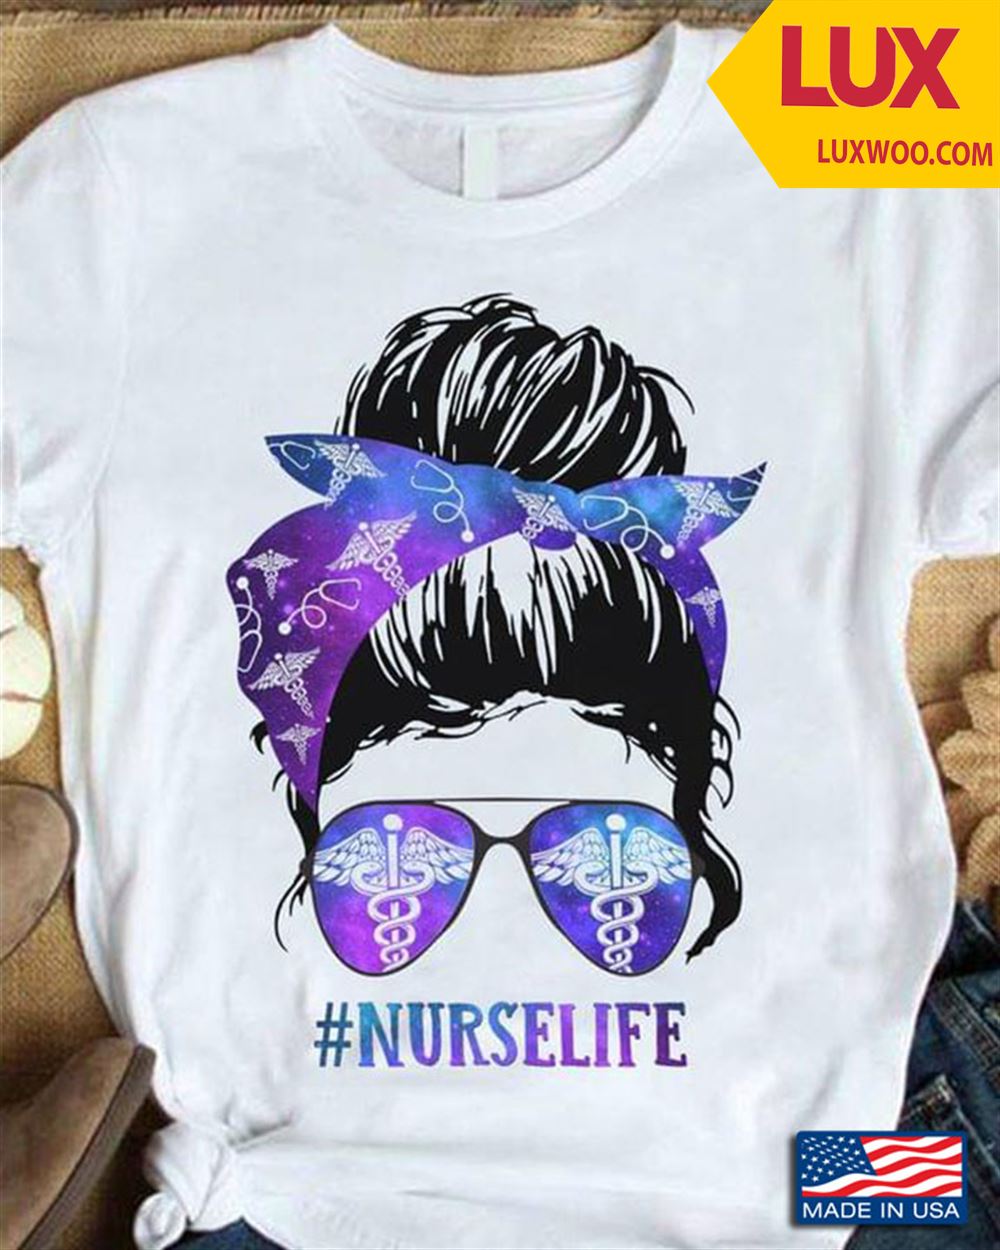 Nurselife Girl Tshirt Size Up To 5xl